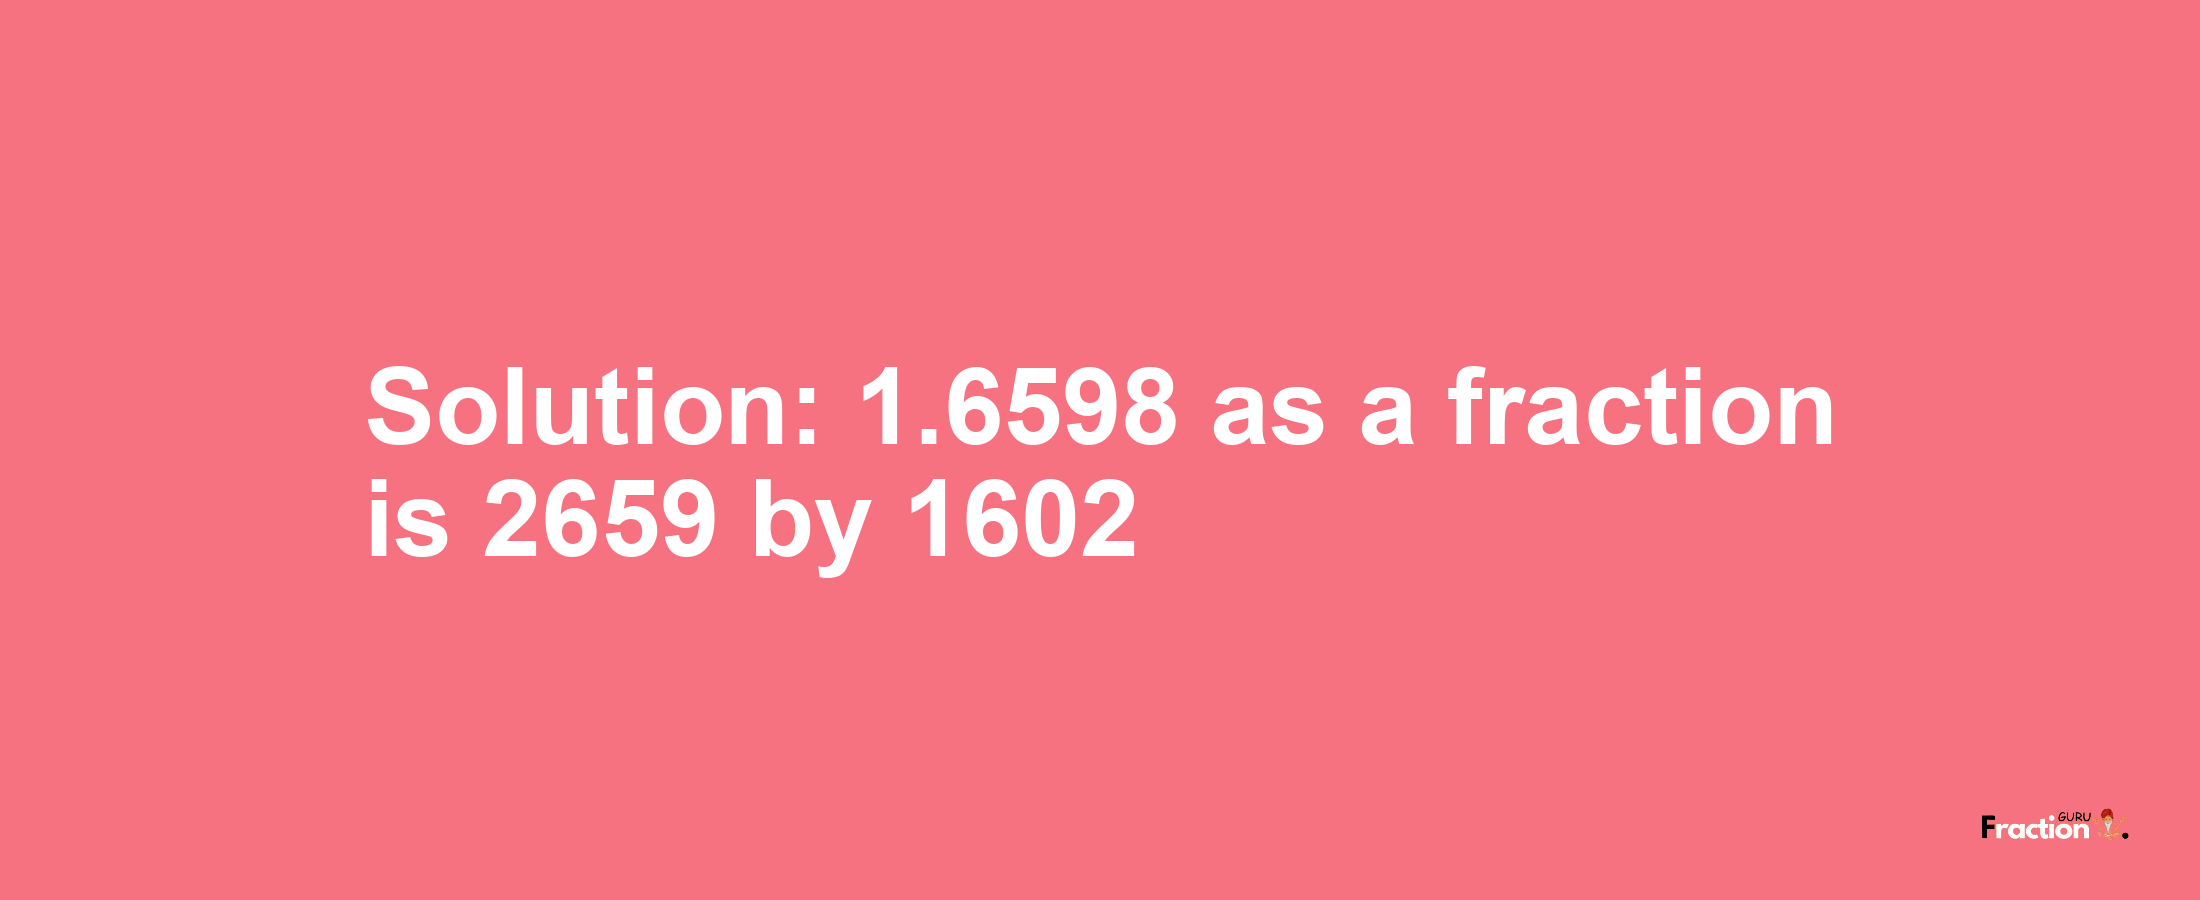 Solution:1.6598 as a fraction is 2659/1602